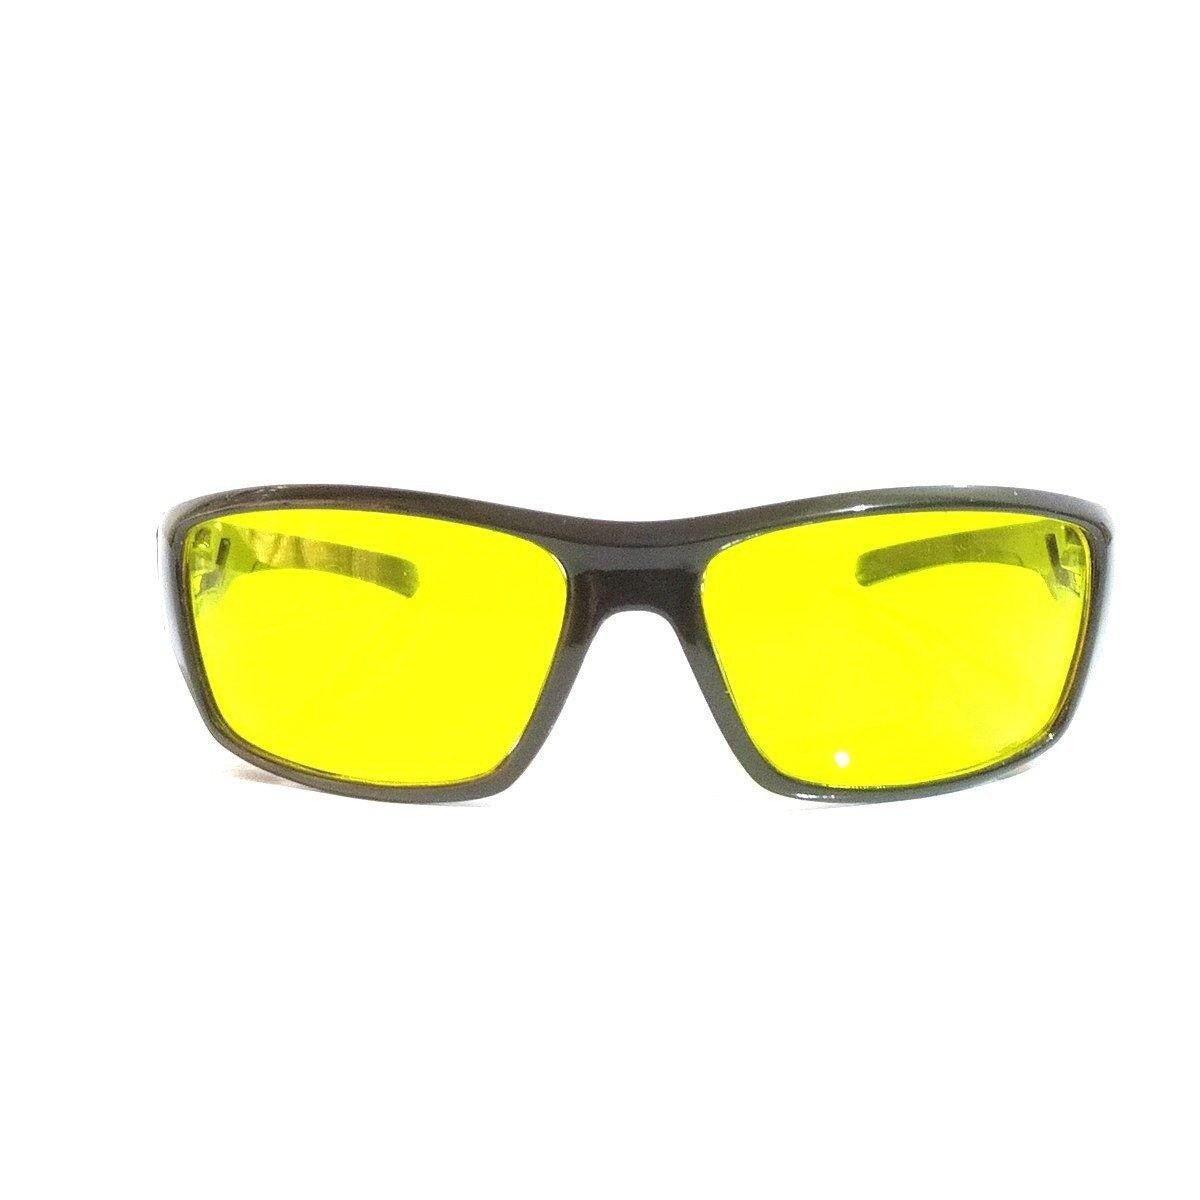 Night Driving Glasses for Men and Women Sunglasses with HD Yellow Lens M11 - Glasses India Online